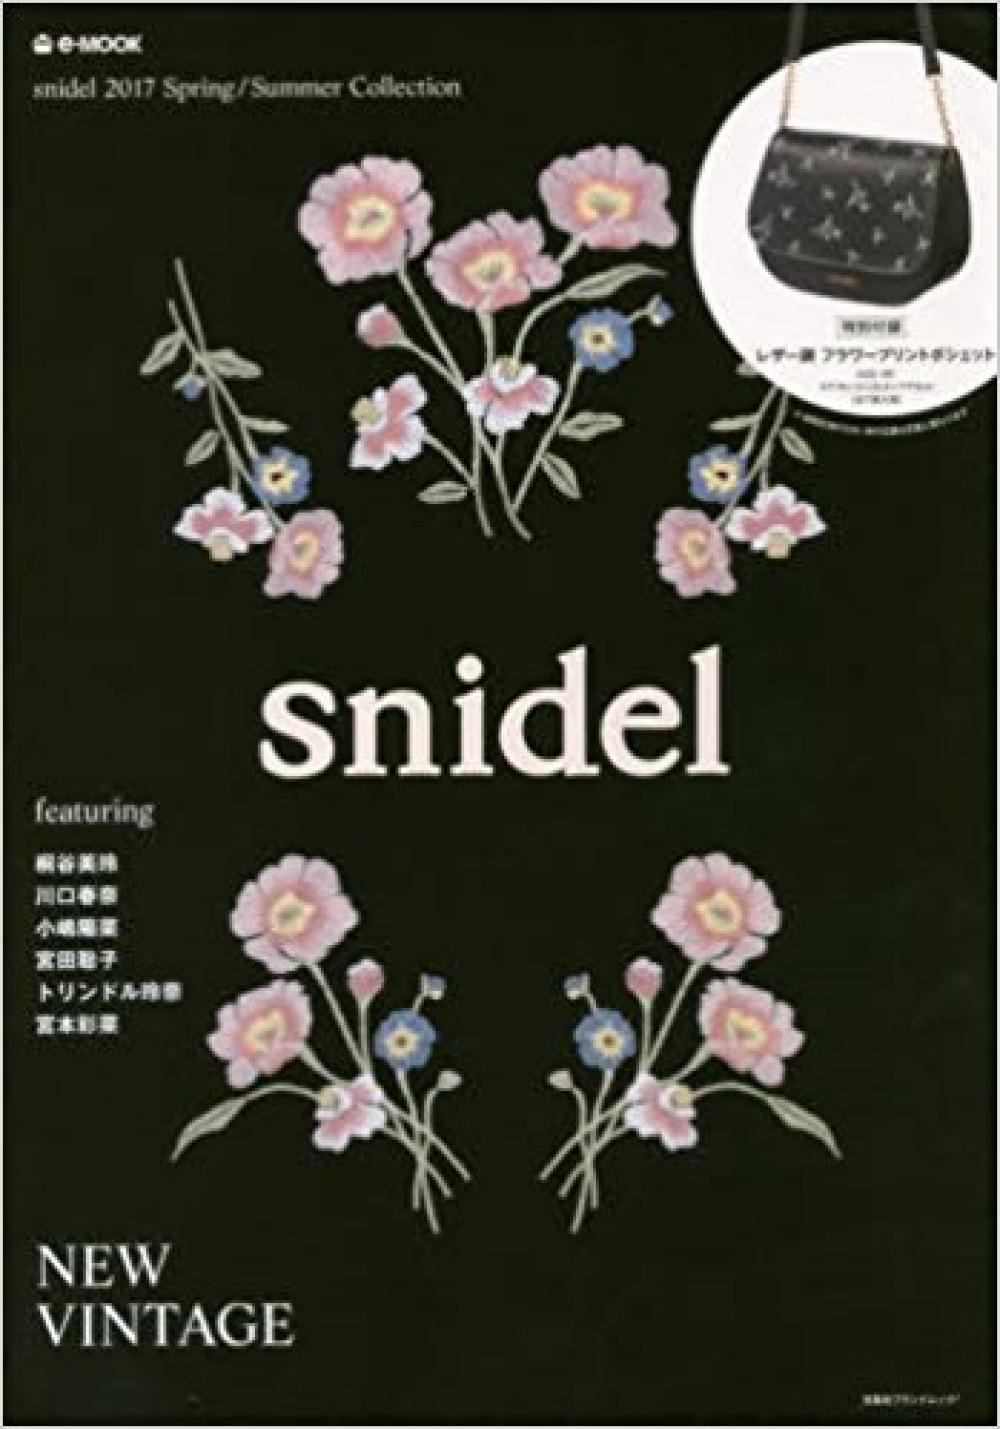 snidel 2017 Spring/Summer Collection (e-MOOK 宝島社ブランドムック) 